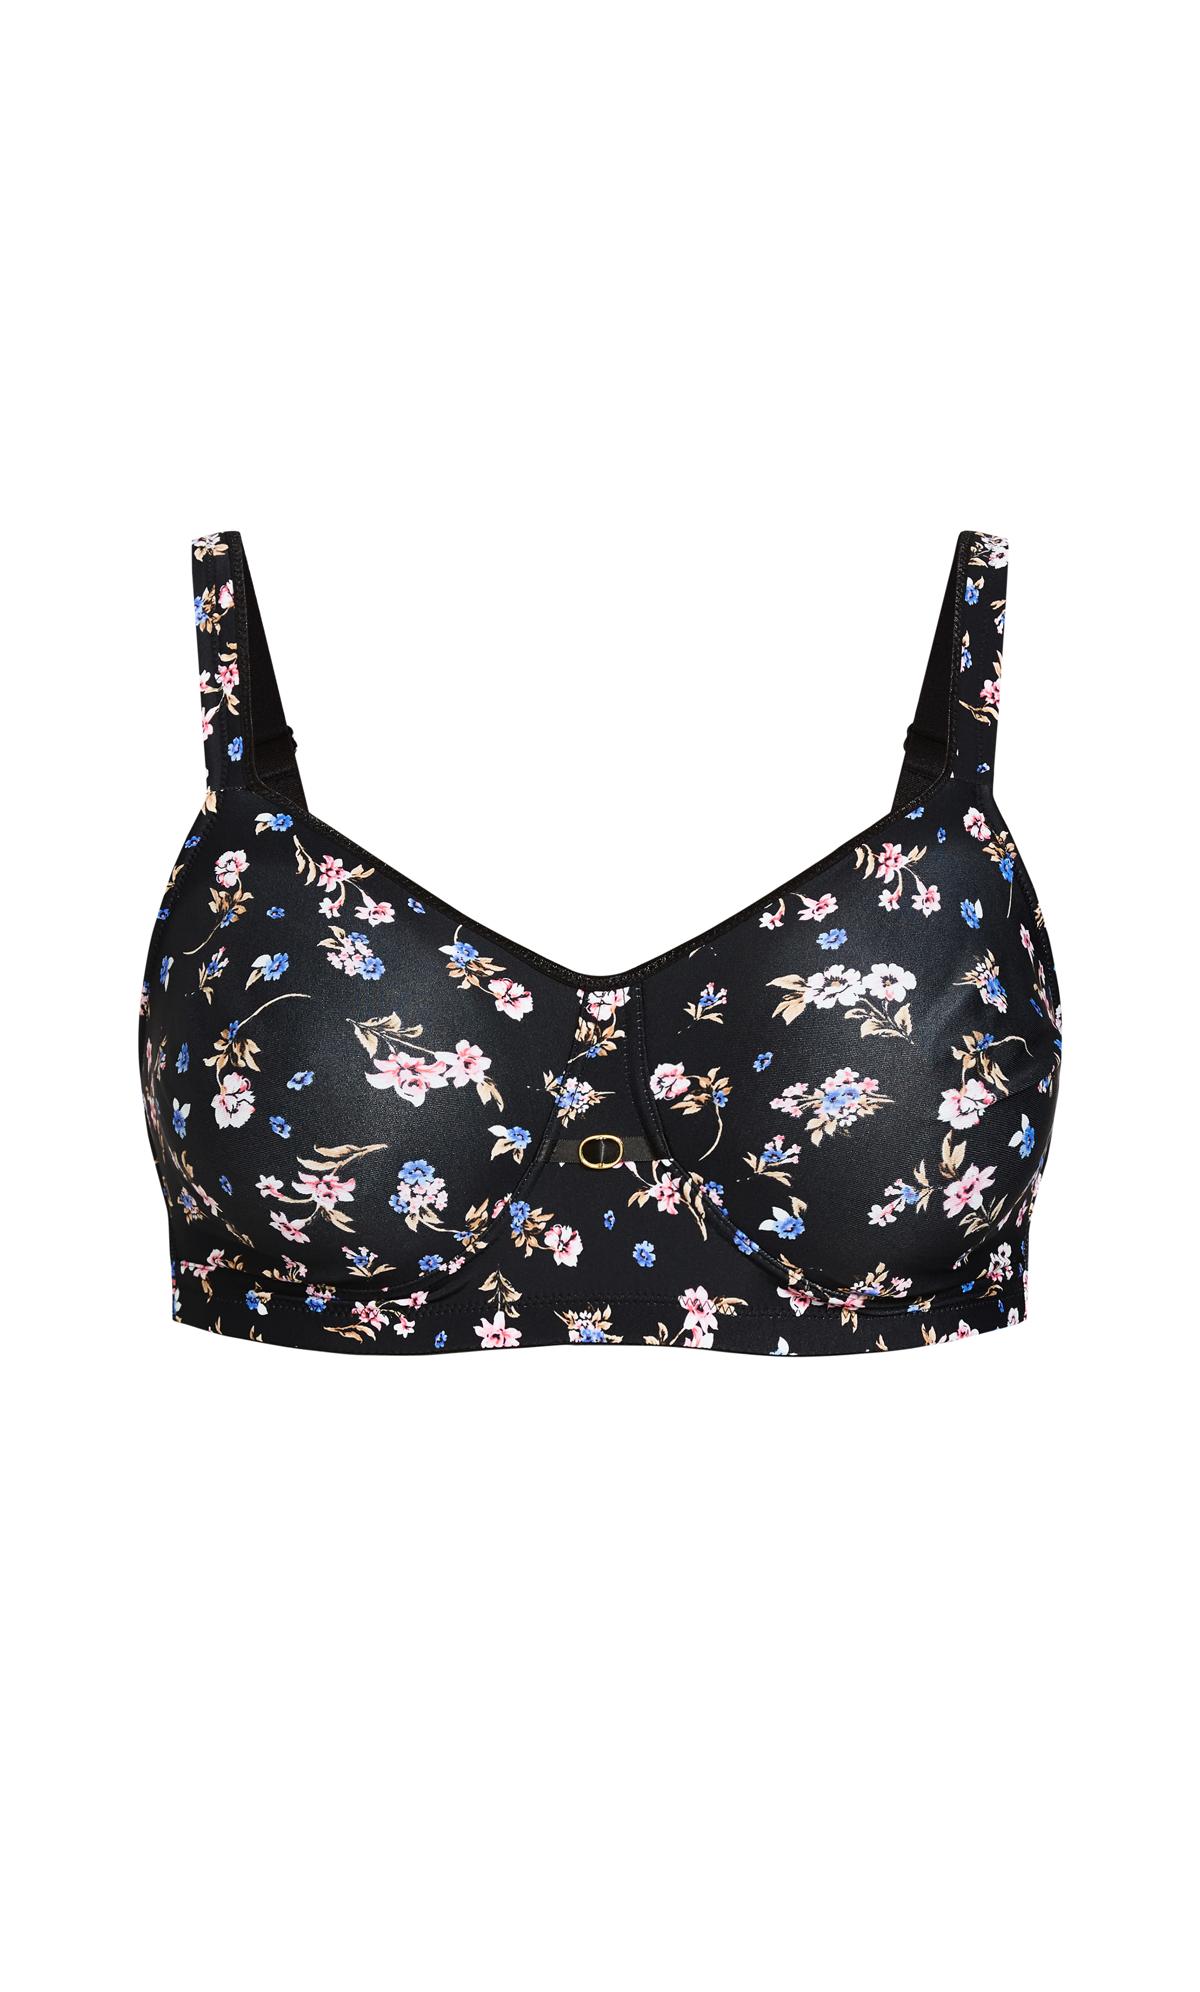 Buy A1 UNIQUE Cotton Flower Print Bra, Full-Padded, Non-Wired Bra